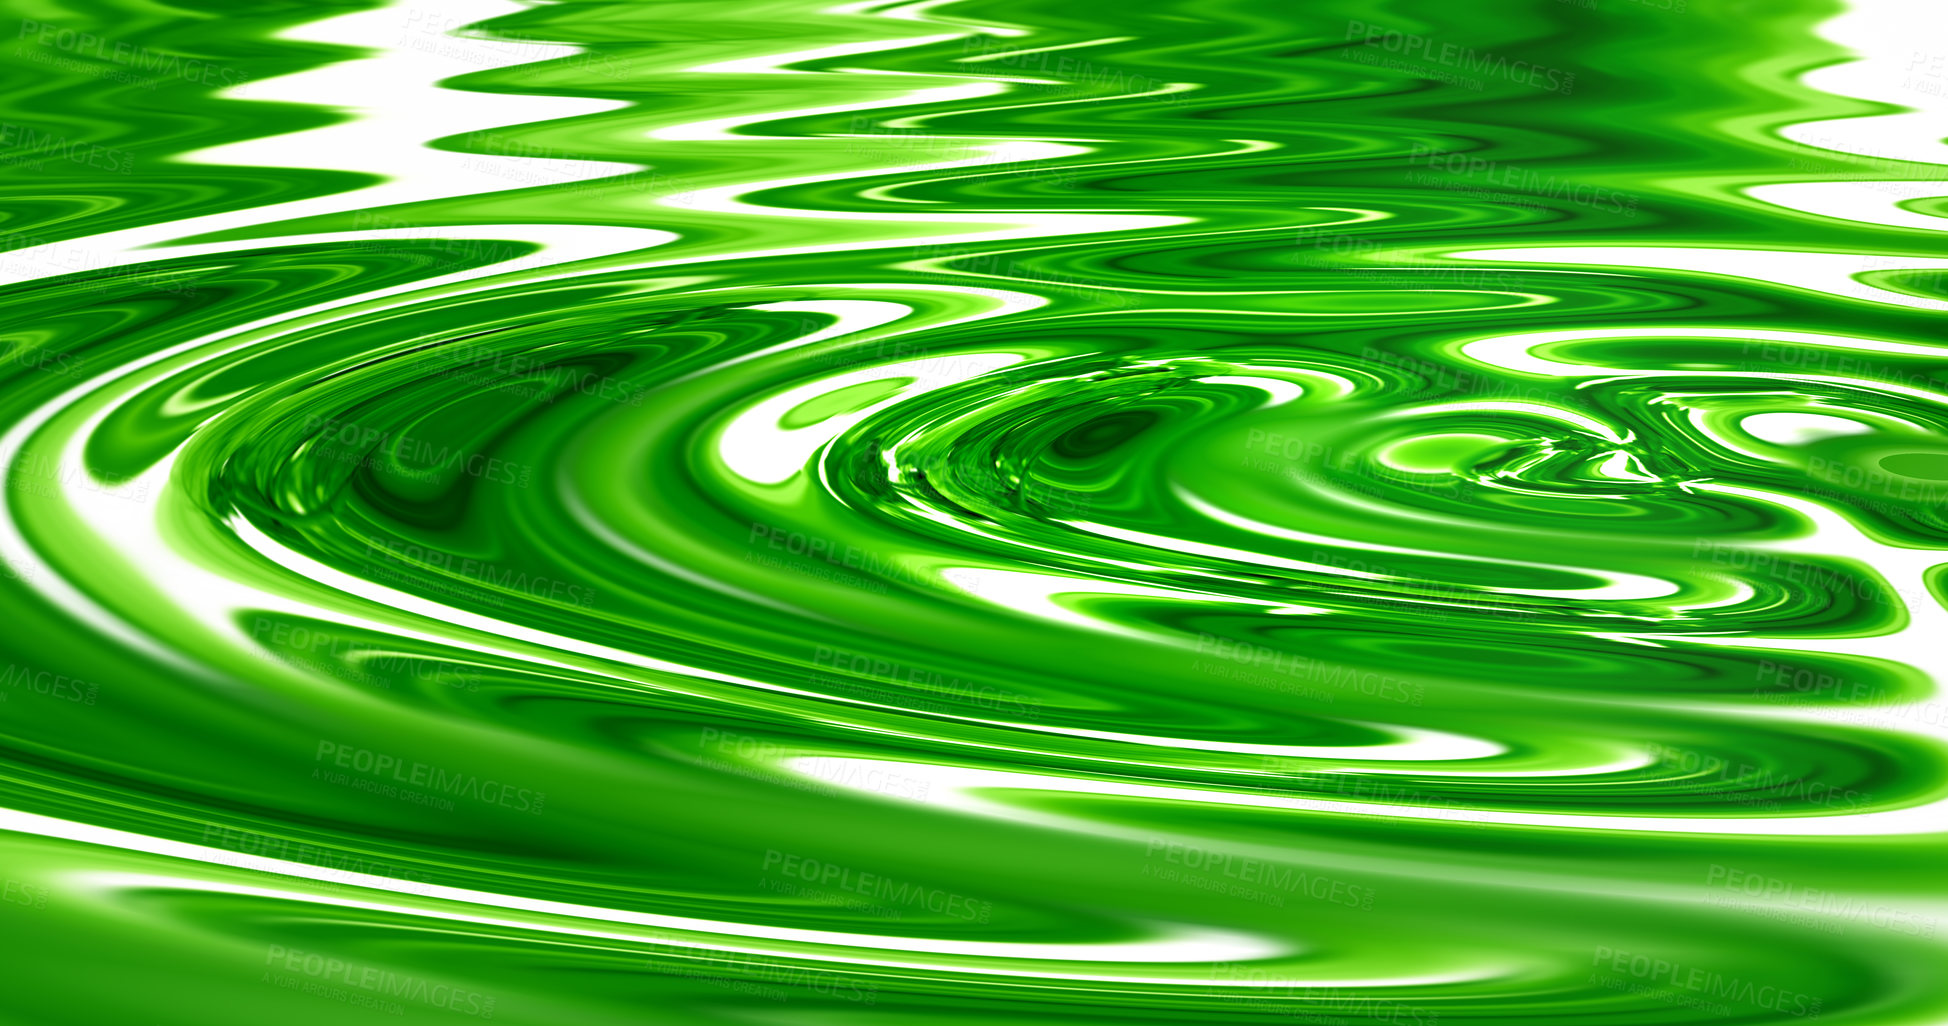 Buy stock photo 3D, animated and VFX of neon, shiny and futuristic waves making ripples in liquid green color substance. Texture, movement and pool with glowing zen water for a vaporwave aesthetic background